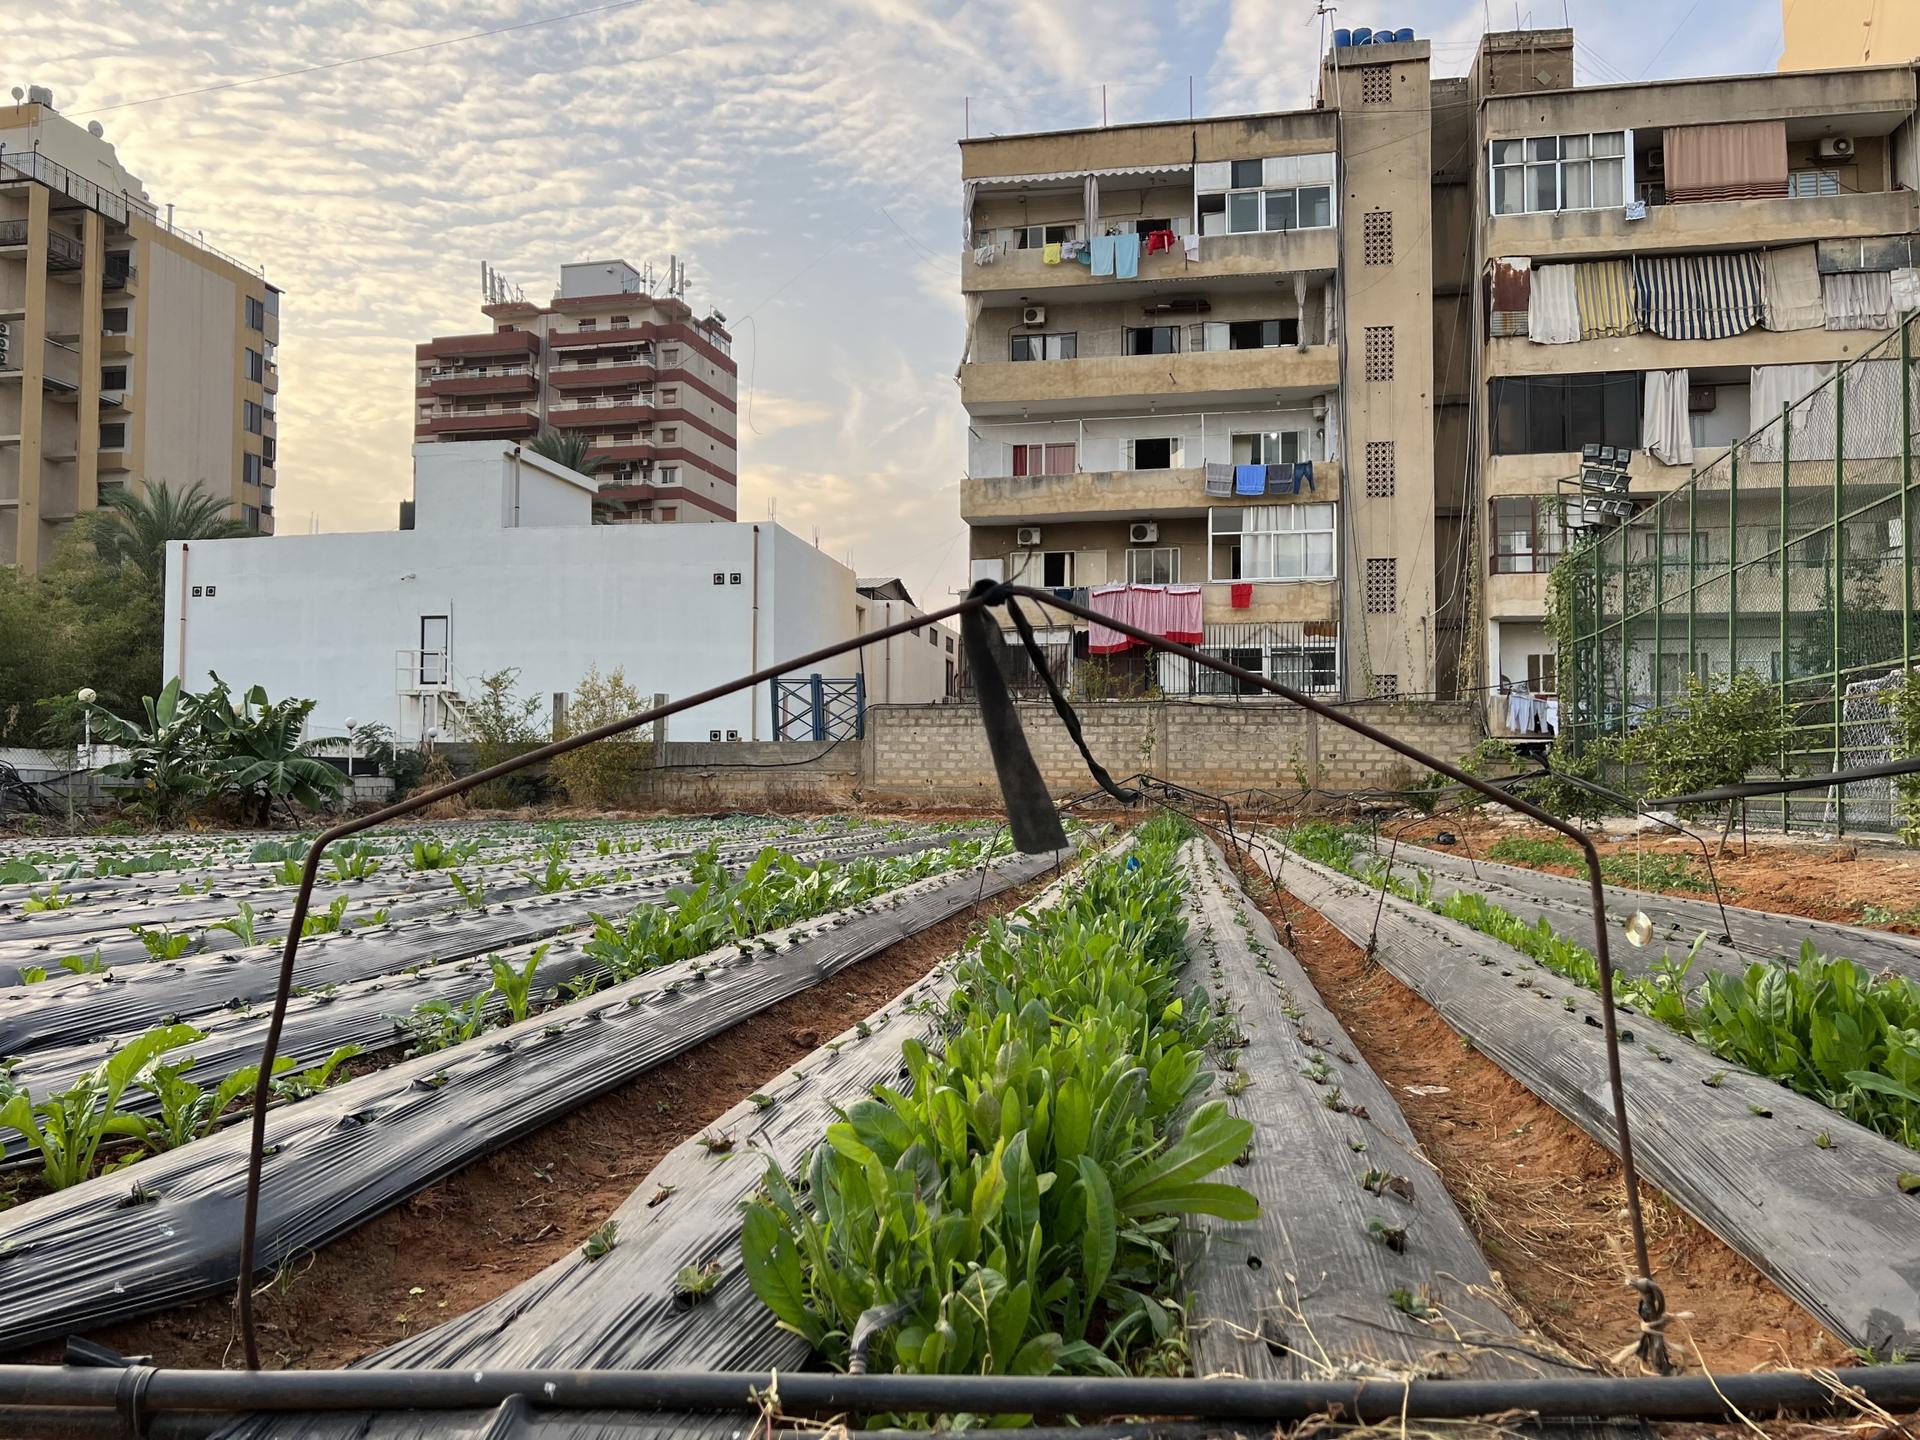 Hanna Mikhael, who is experimenting with ways to help people become more self-sufficient, showed an example of what urban farming can look like in Beirut.